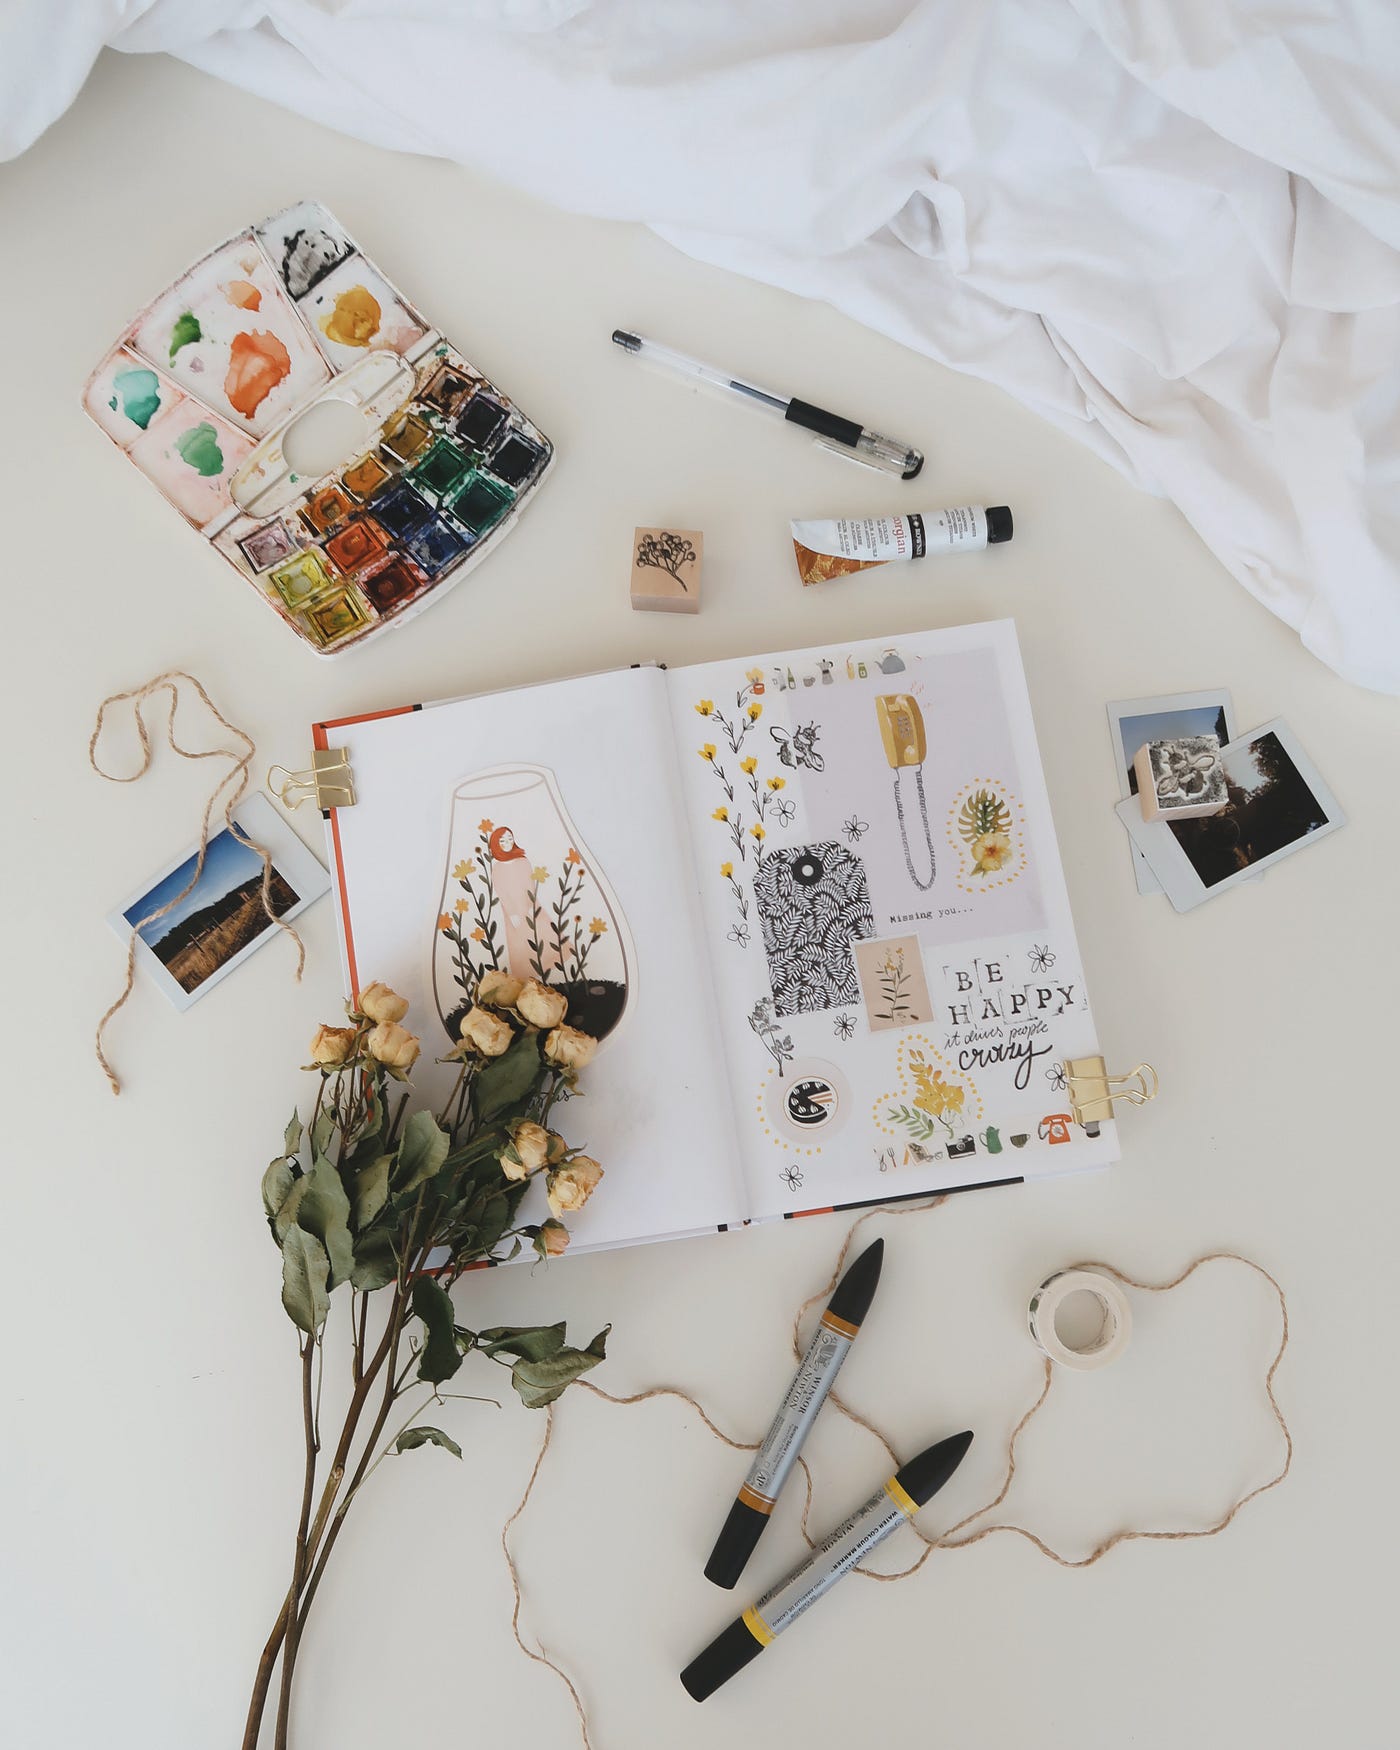 How to Get Junk Journaling Supplies Without Spending Much Money, by Regina  Paul